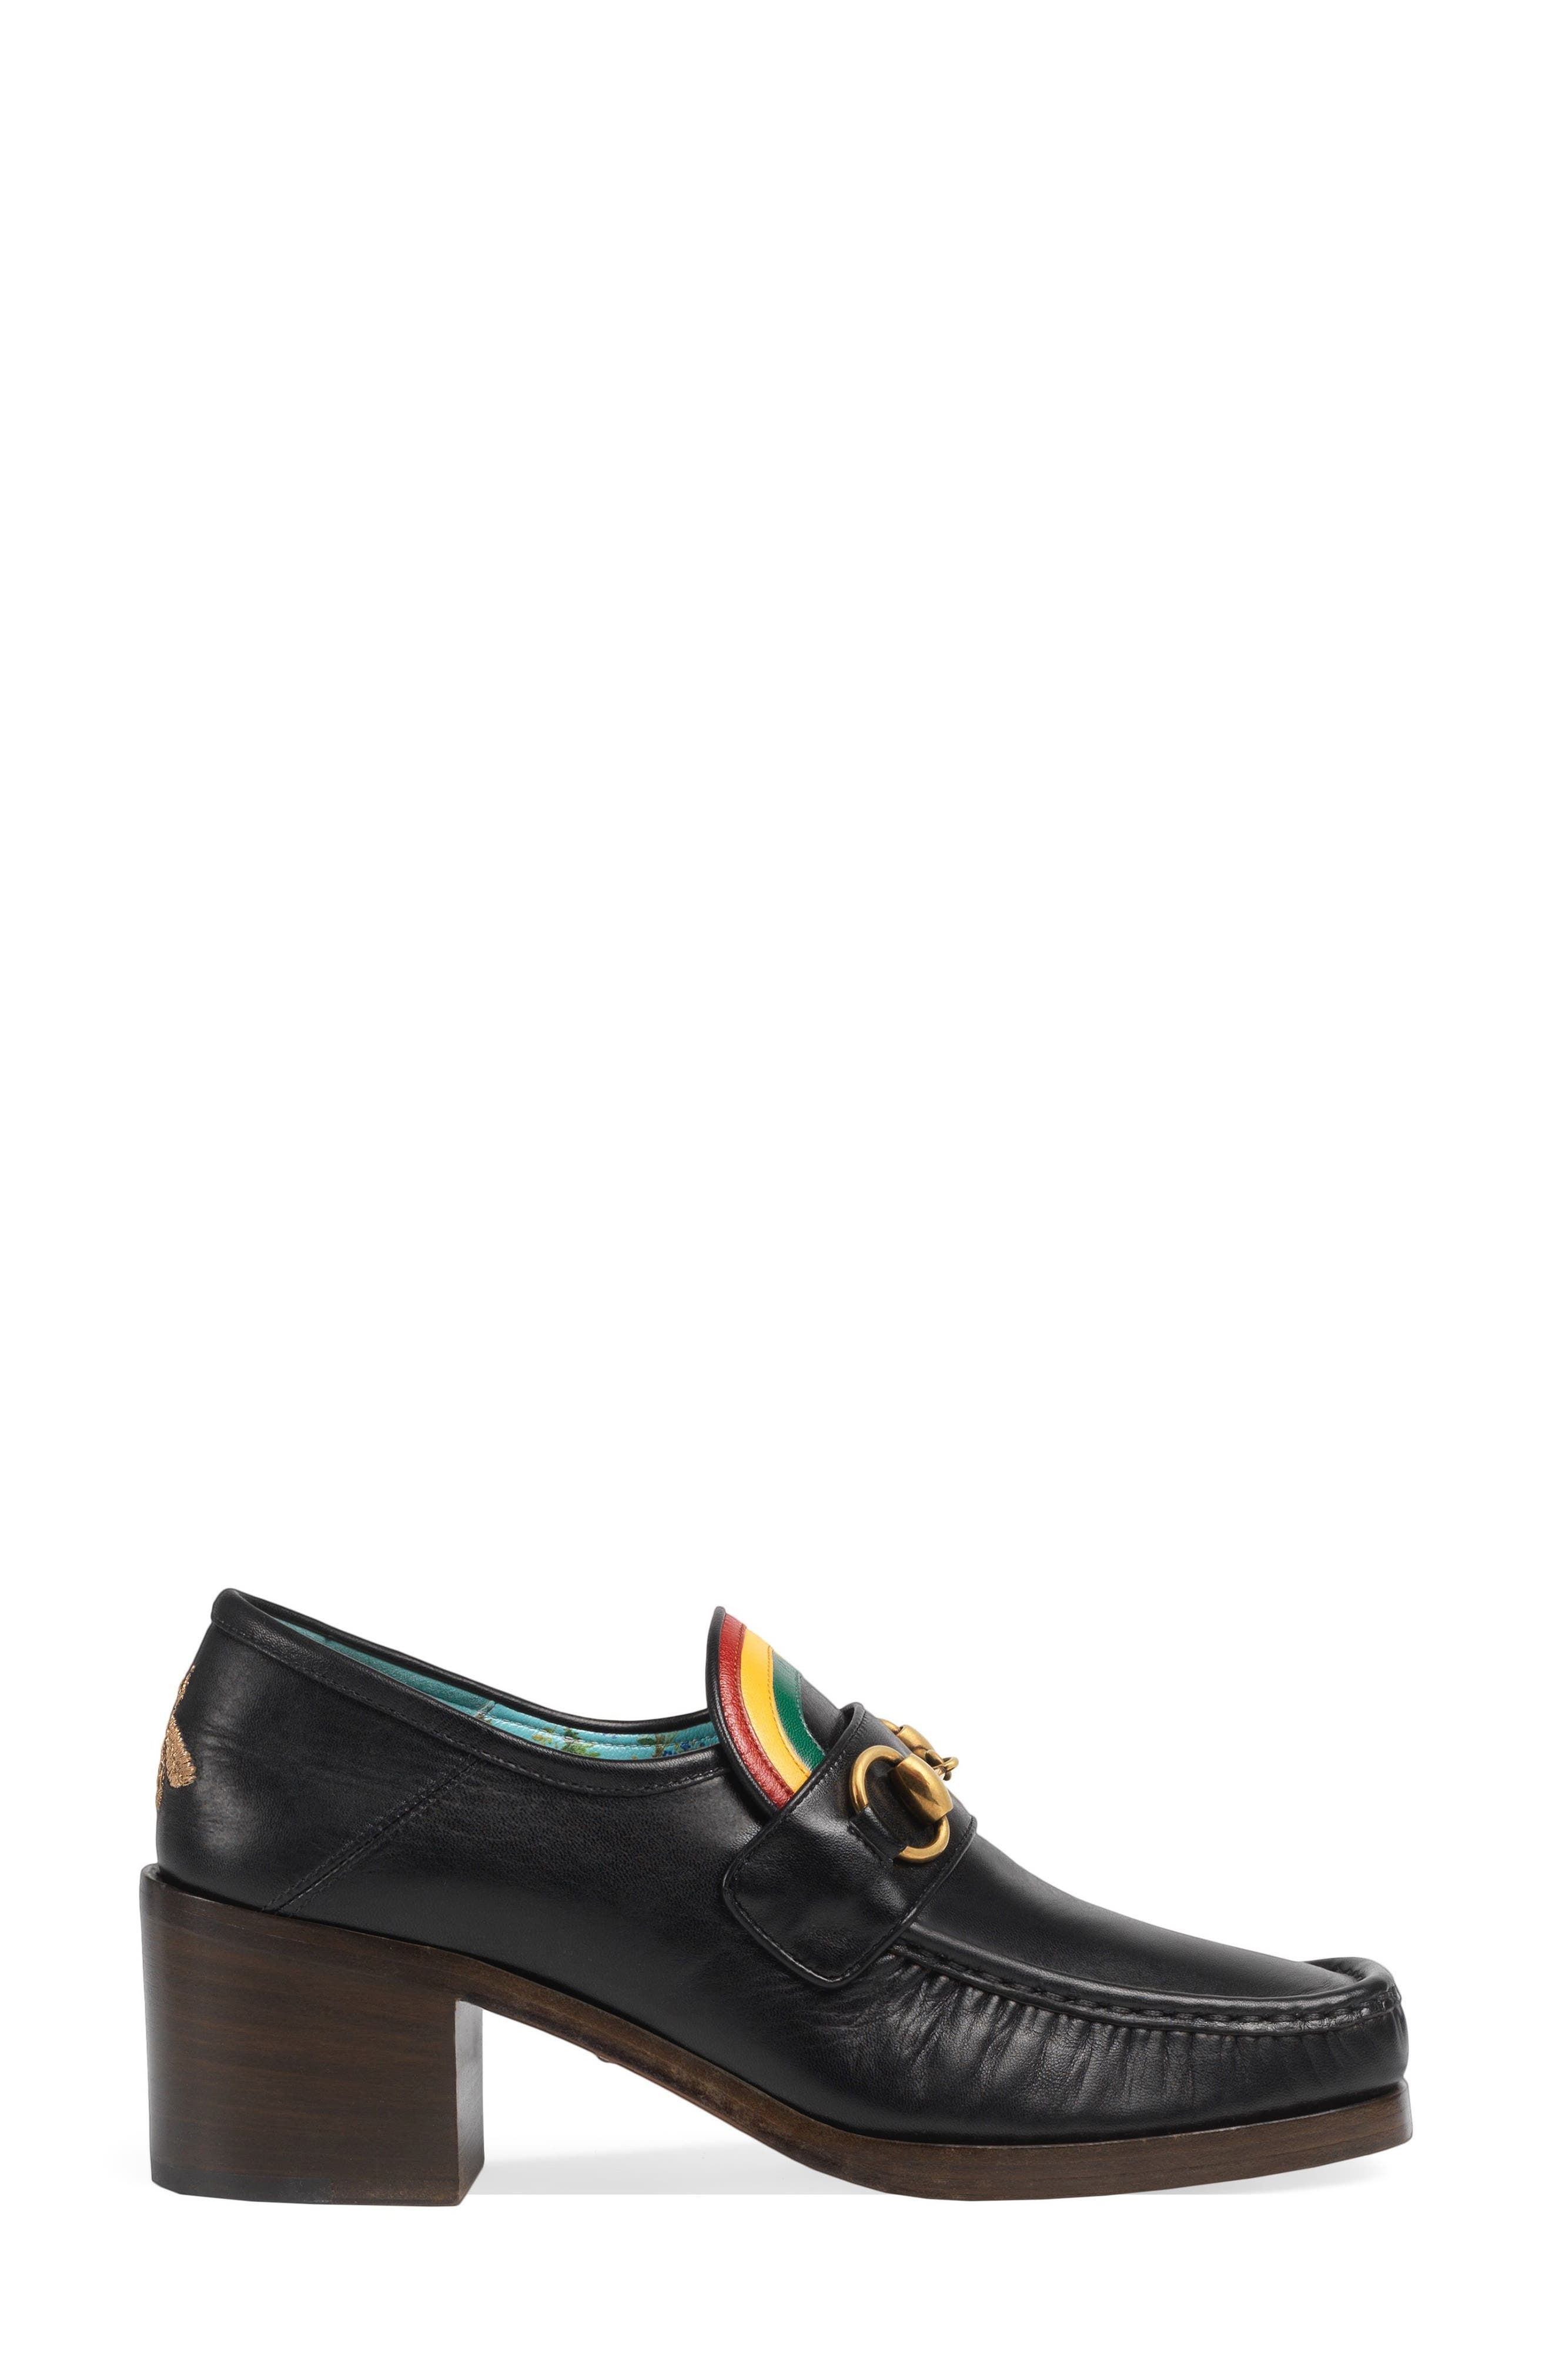 gucci rainbow loafers